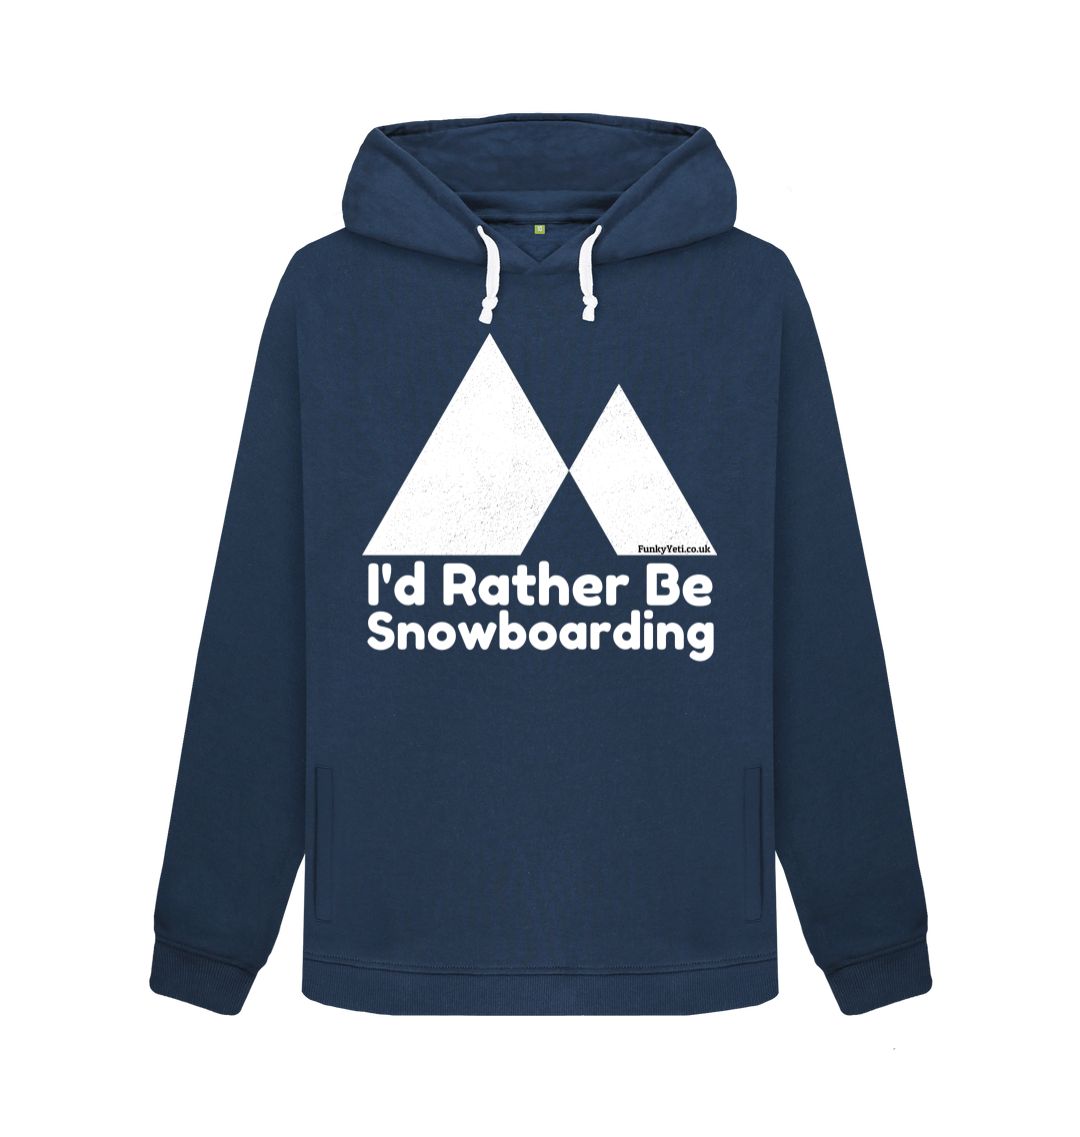 Navy Blue Funky Yeti Women's Pullover Hoodie - I'd Rather Be Snowboarding